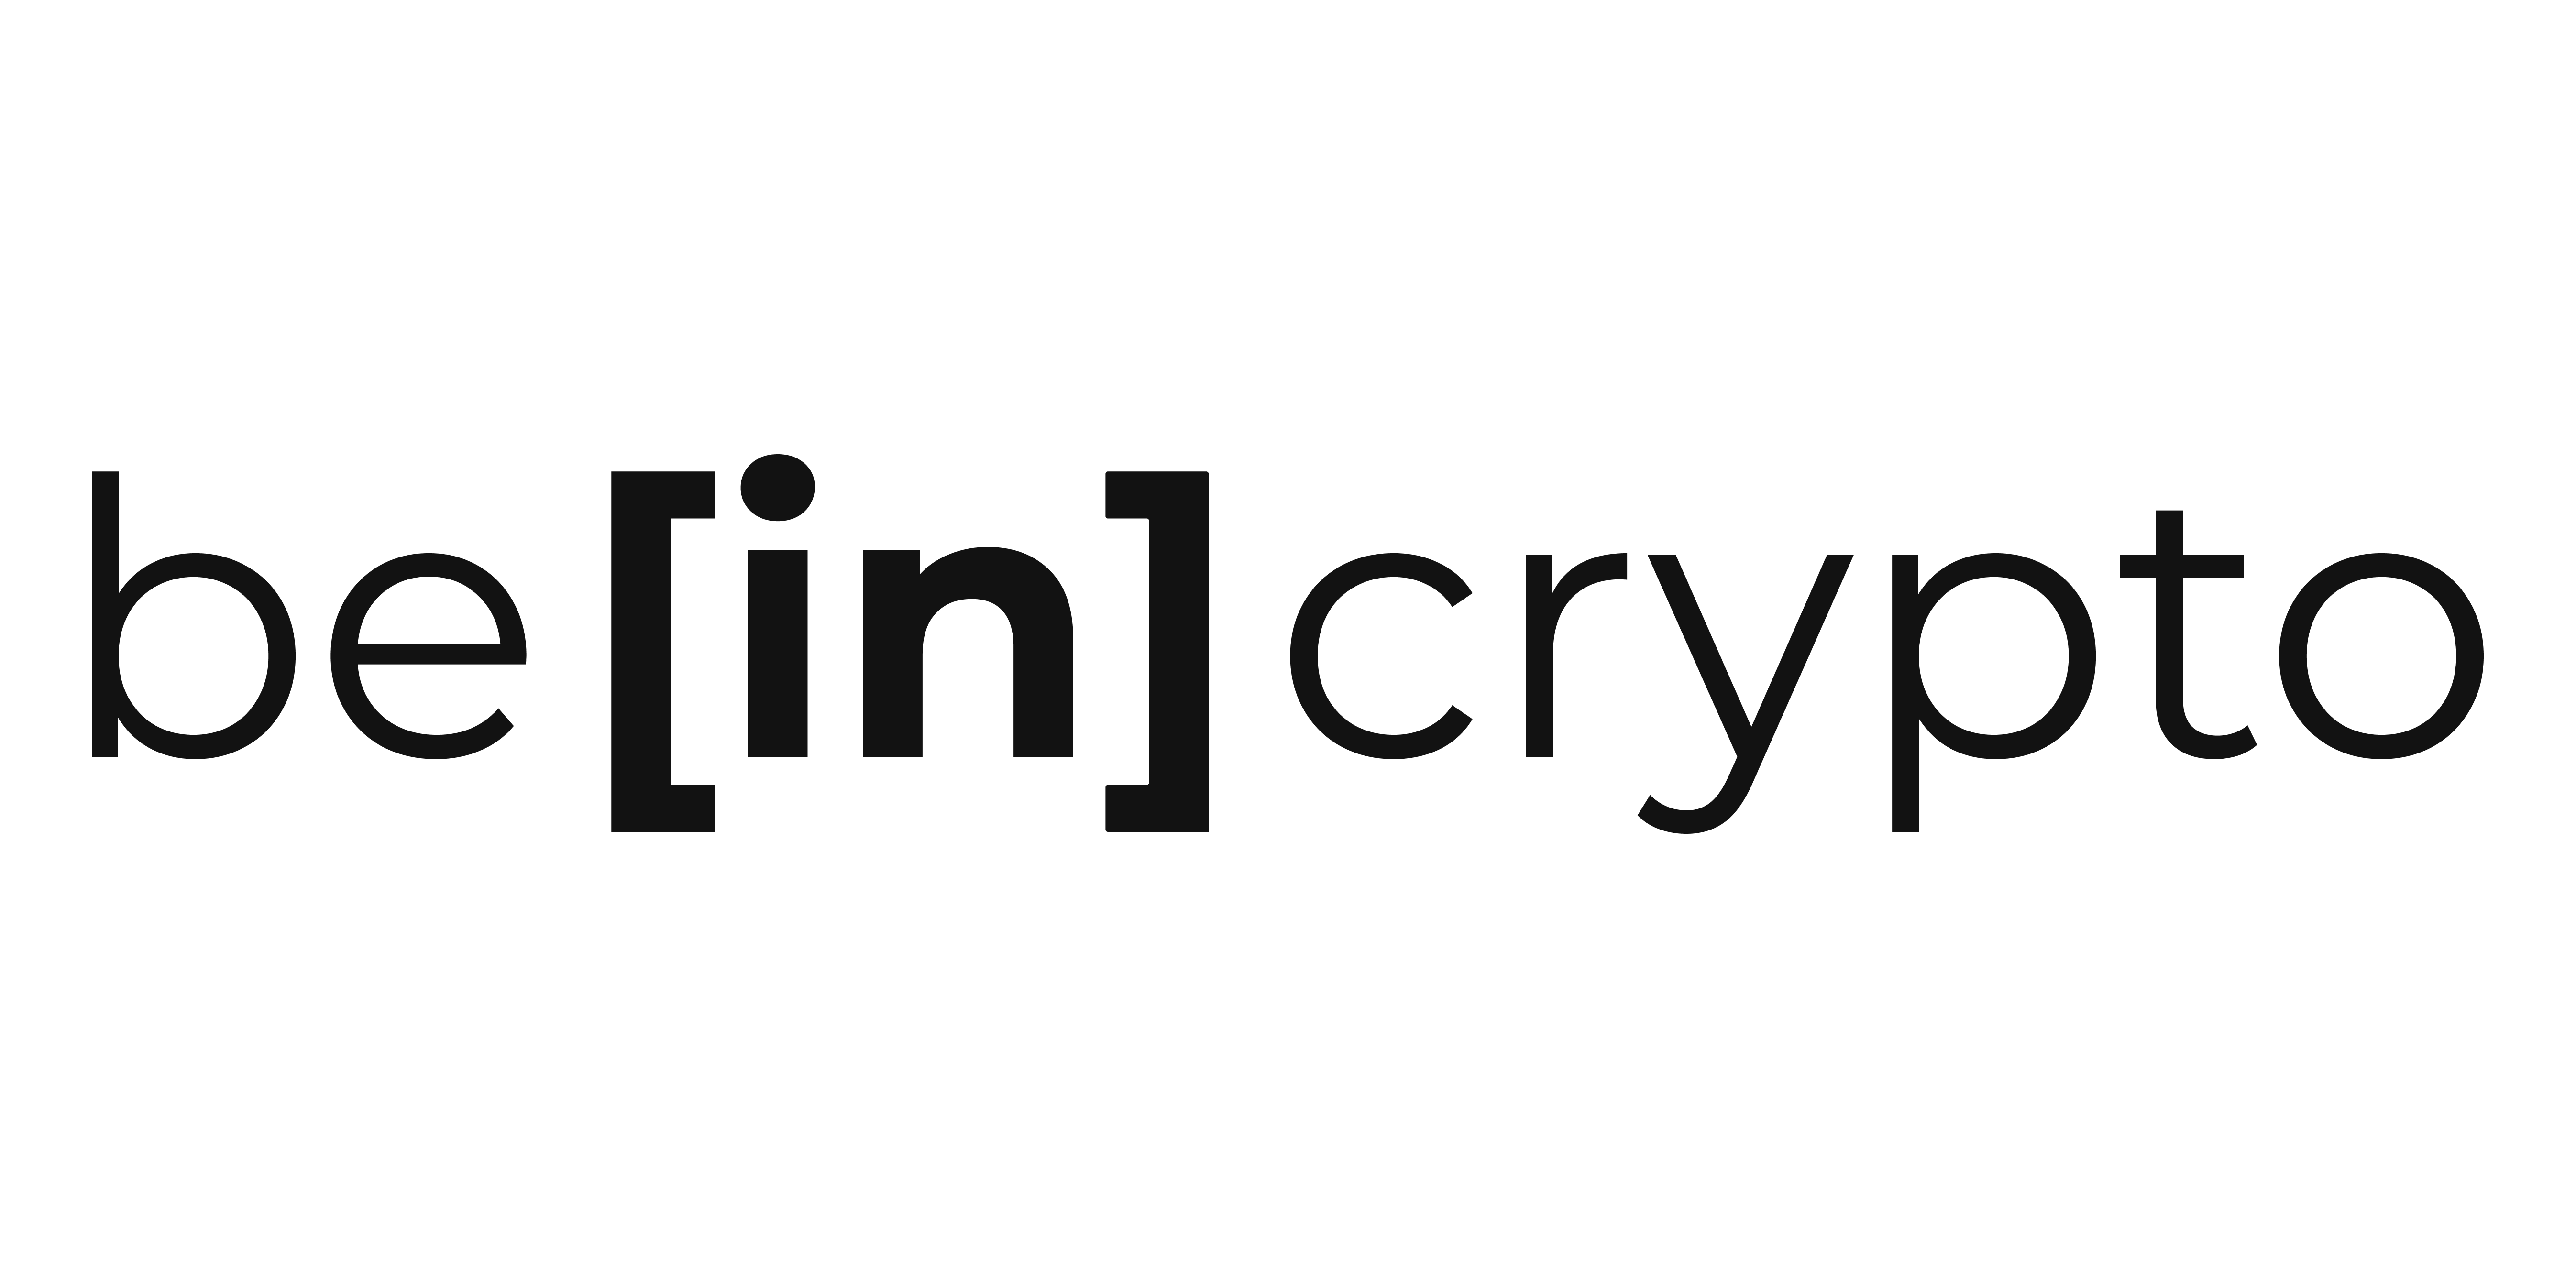 beincrypto.png